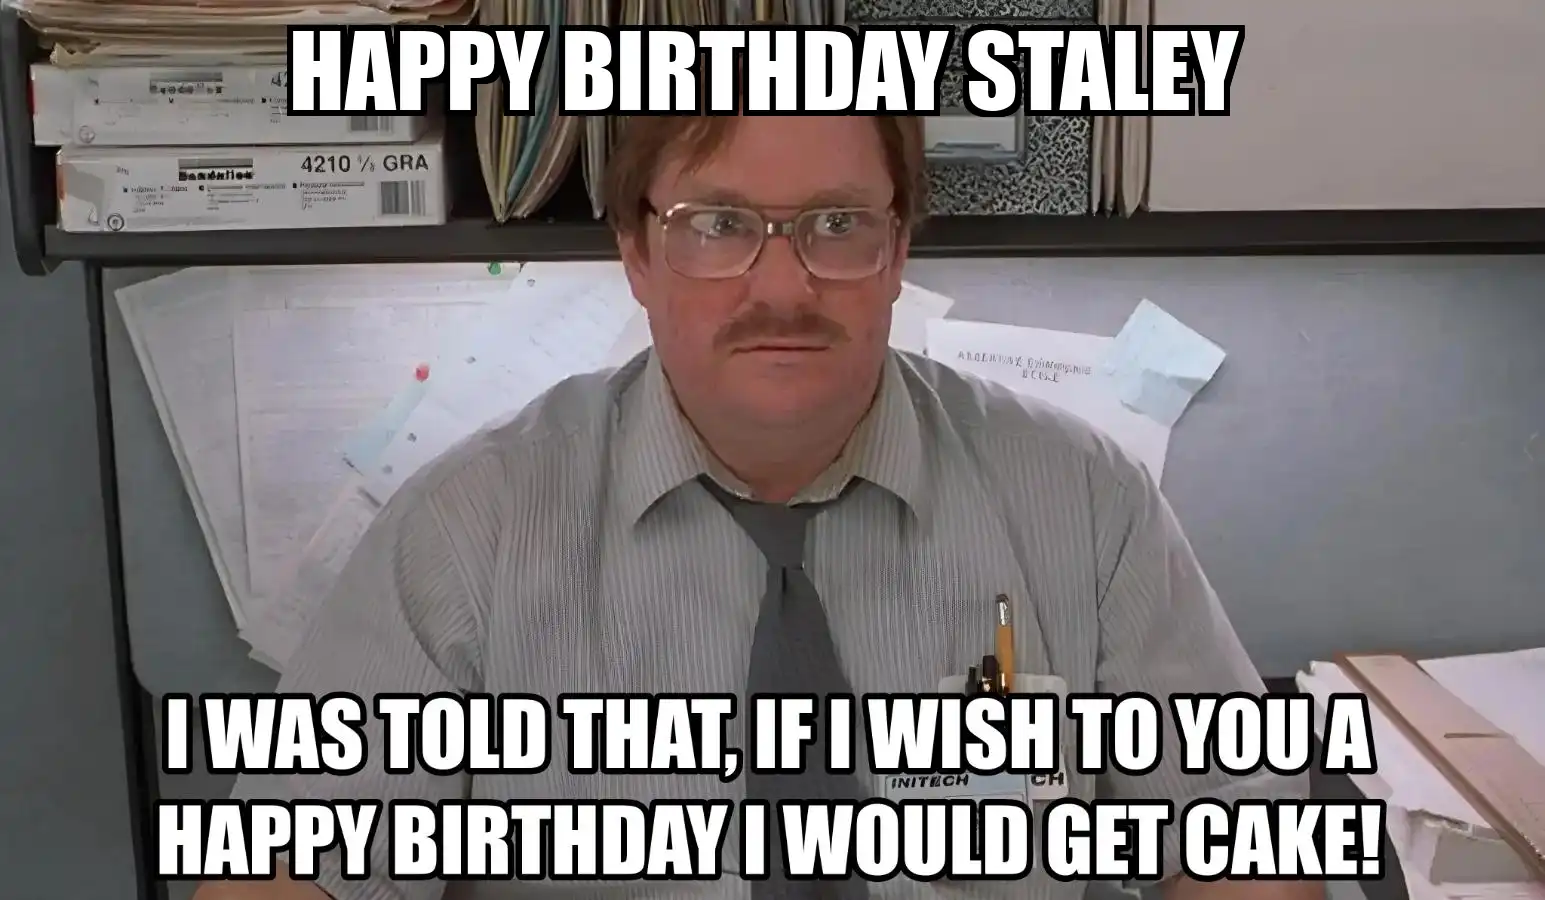 Happy Birthday Staley I Would Get A Cake Meme